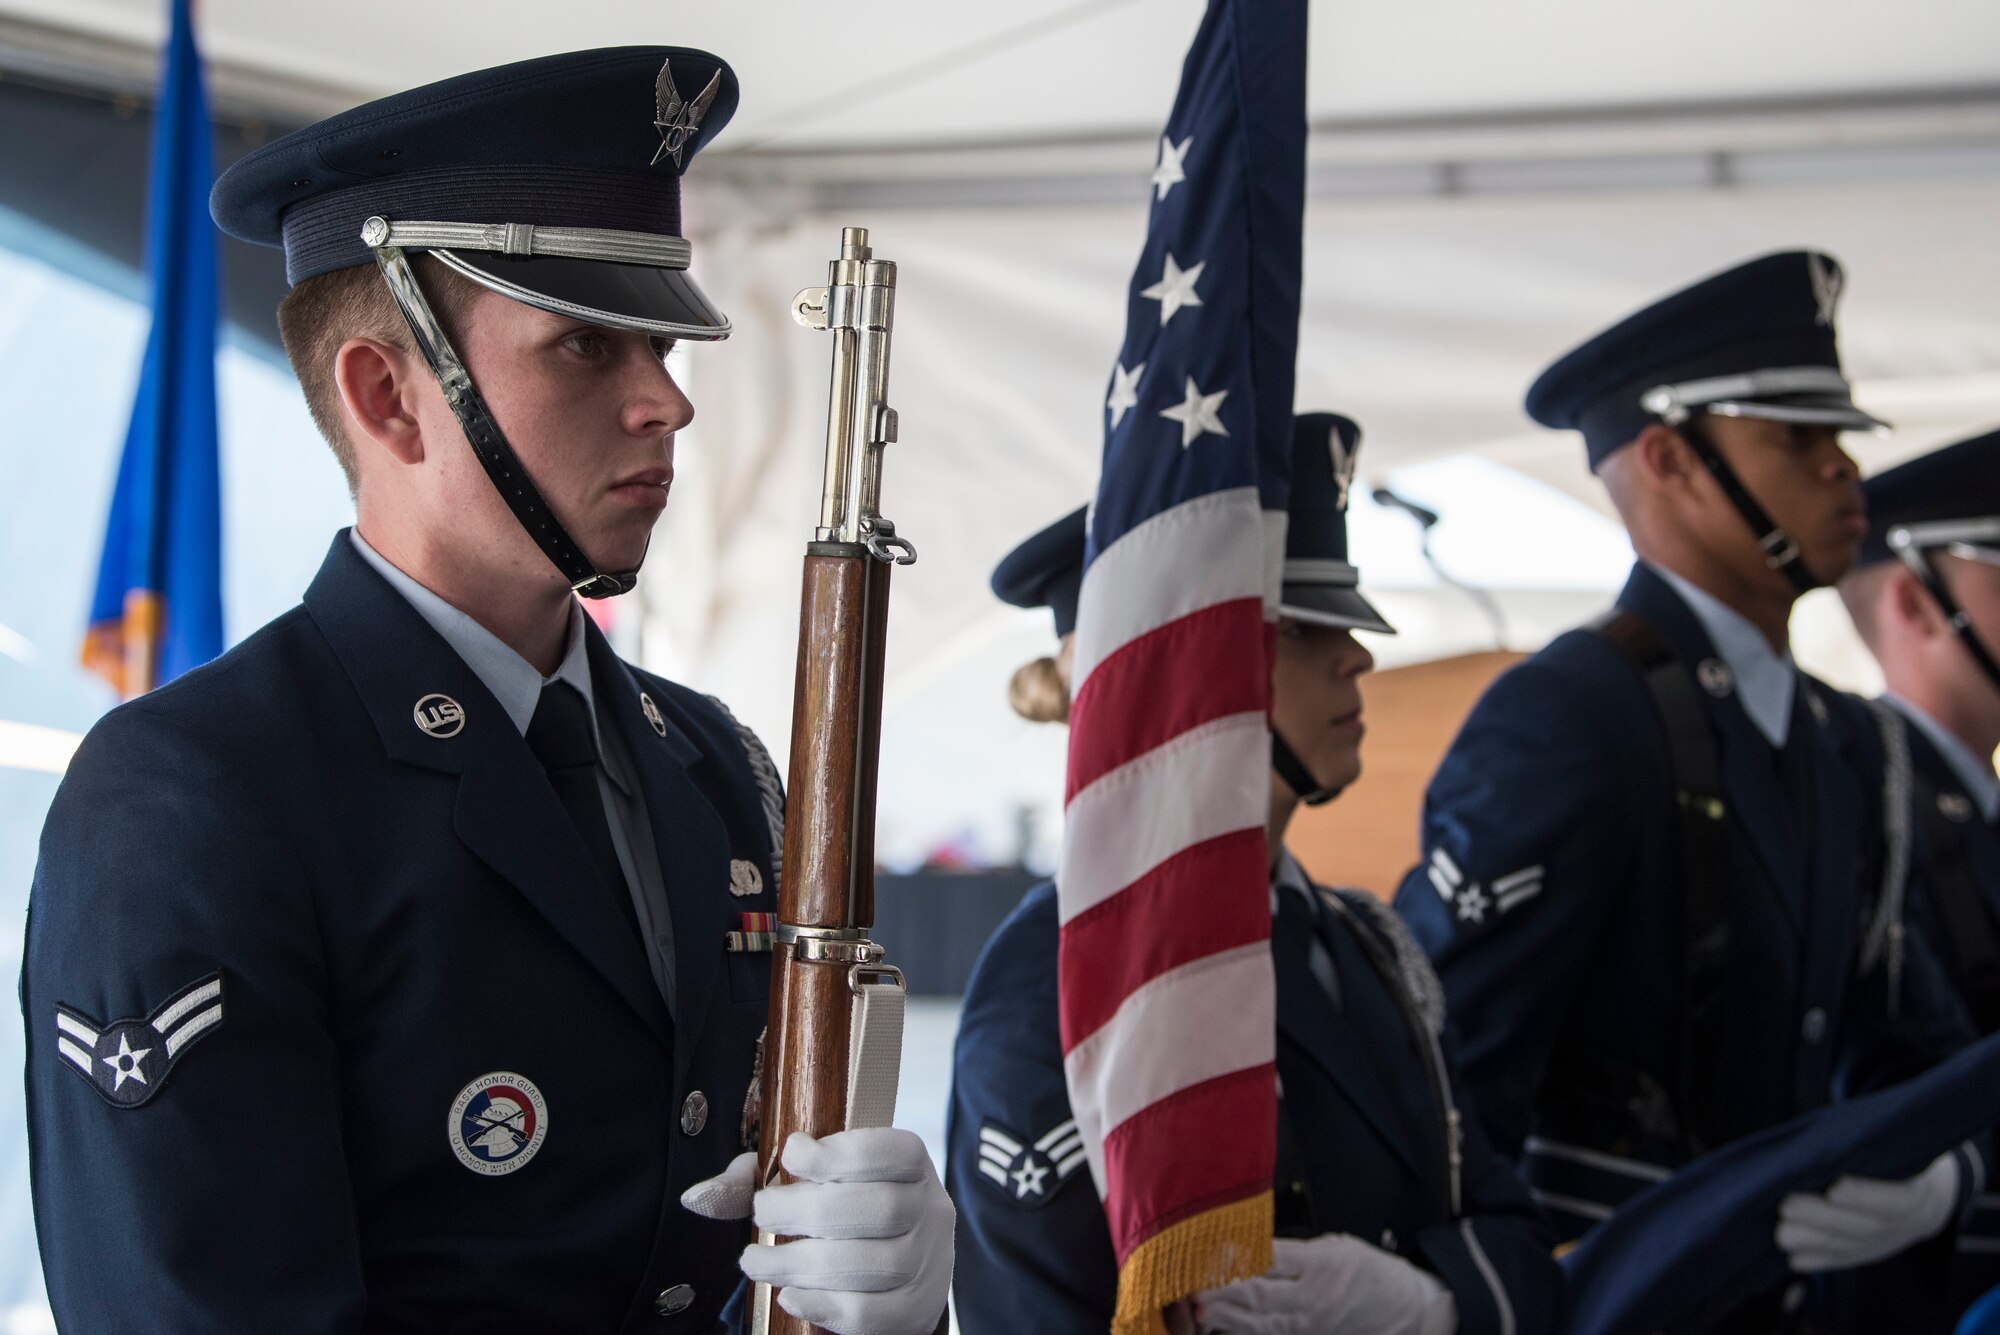 U.S. Air Force Honor Guardsmen present the colors during the opening ceremony for Fisher House II at Joint Base Elmendorf-Richardson, Alaska, Sep. 10, 2018. The opening ceremony featured an array of key speakers, the 9th Army Band, Air Force Honor Guard, a ribbon-cutting and a walk-through.